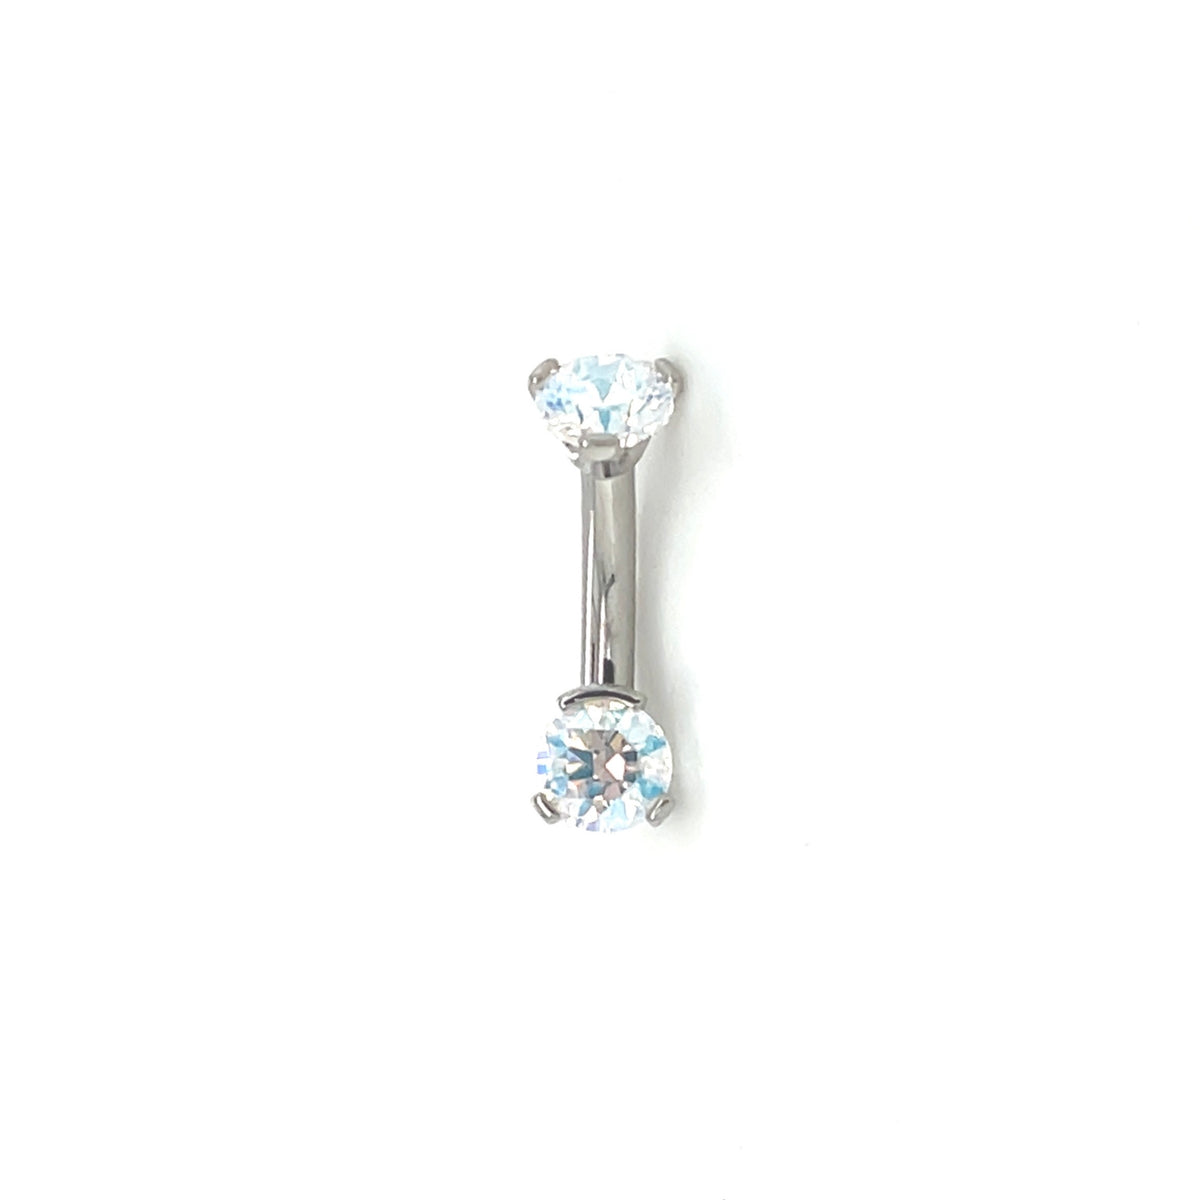 Industrial Strength Titanium Mini Prong Shimmer CZ Curved Barbell